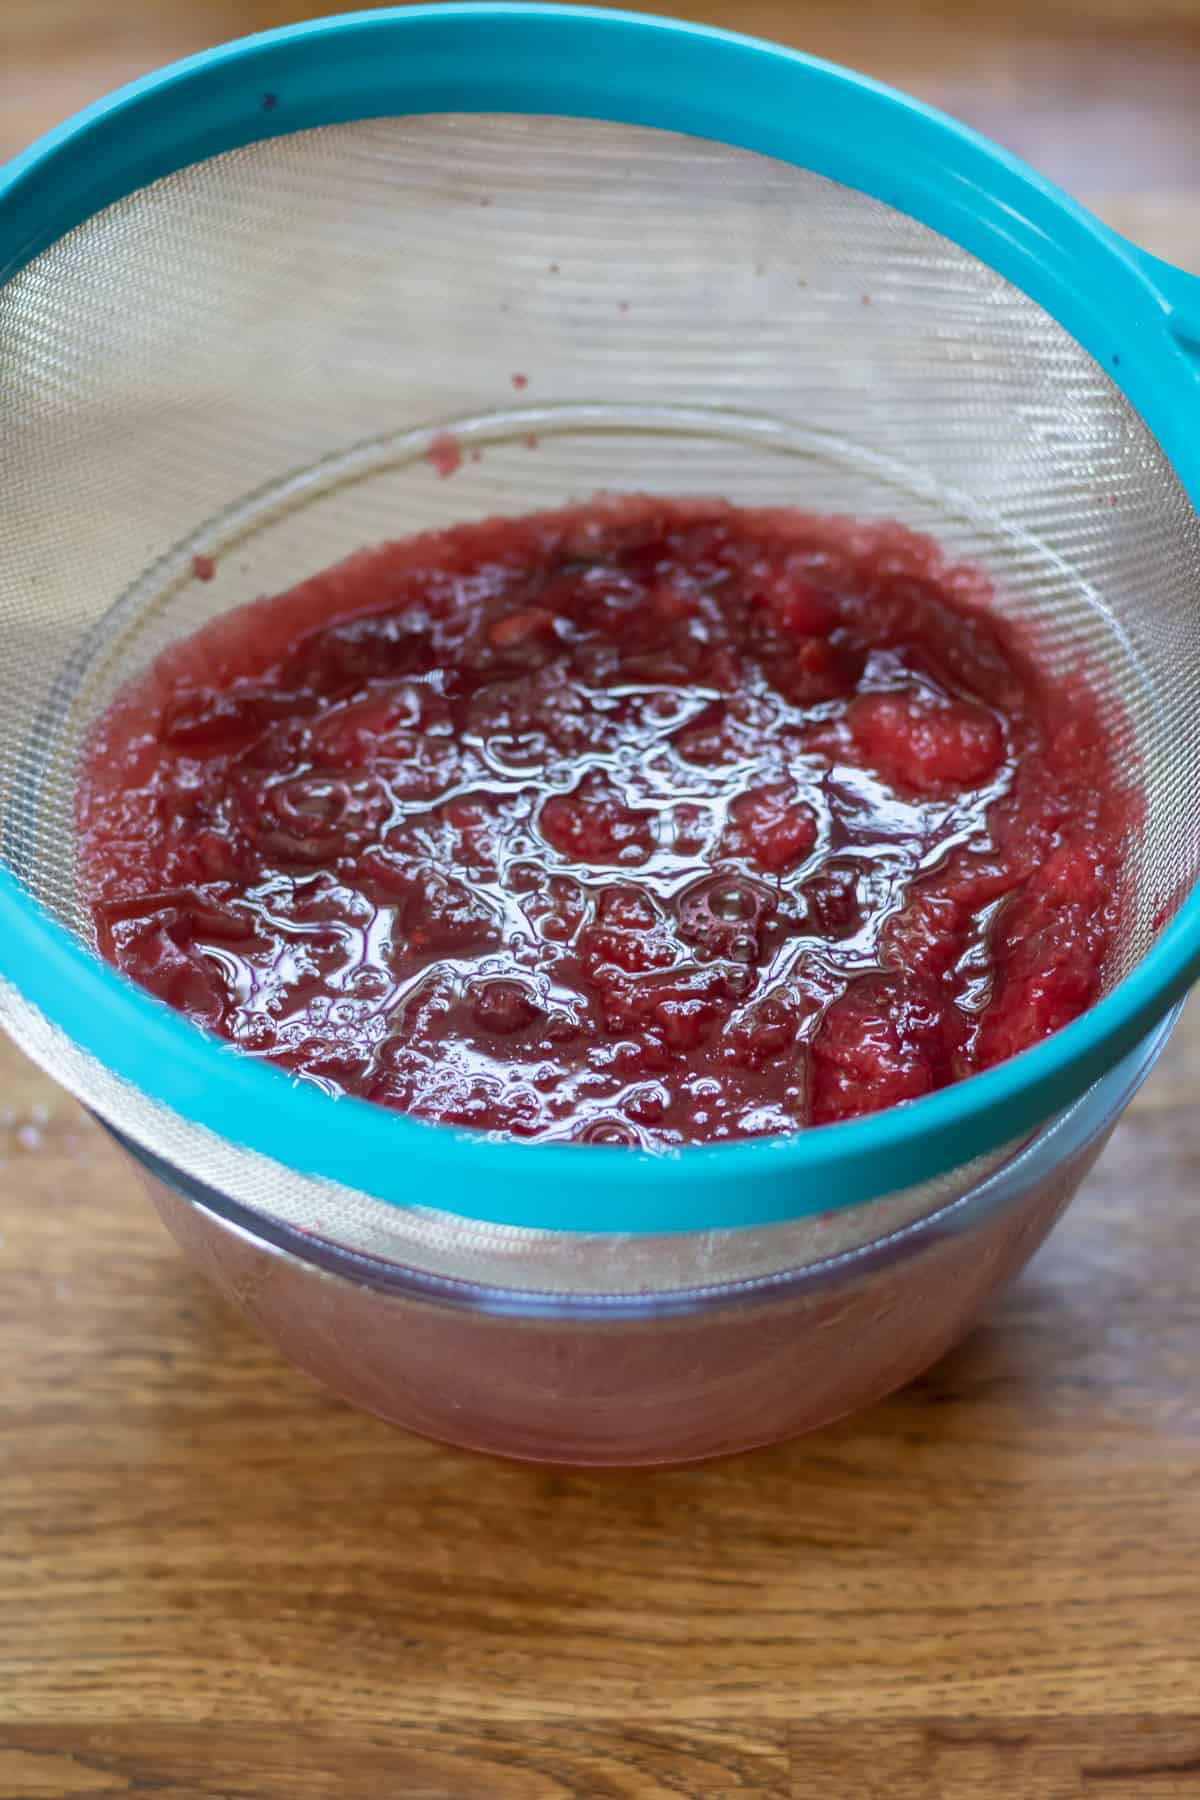 Straining the plum syrup into a bowl through a fine mesh strainer.